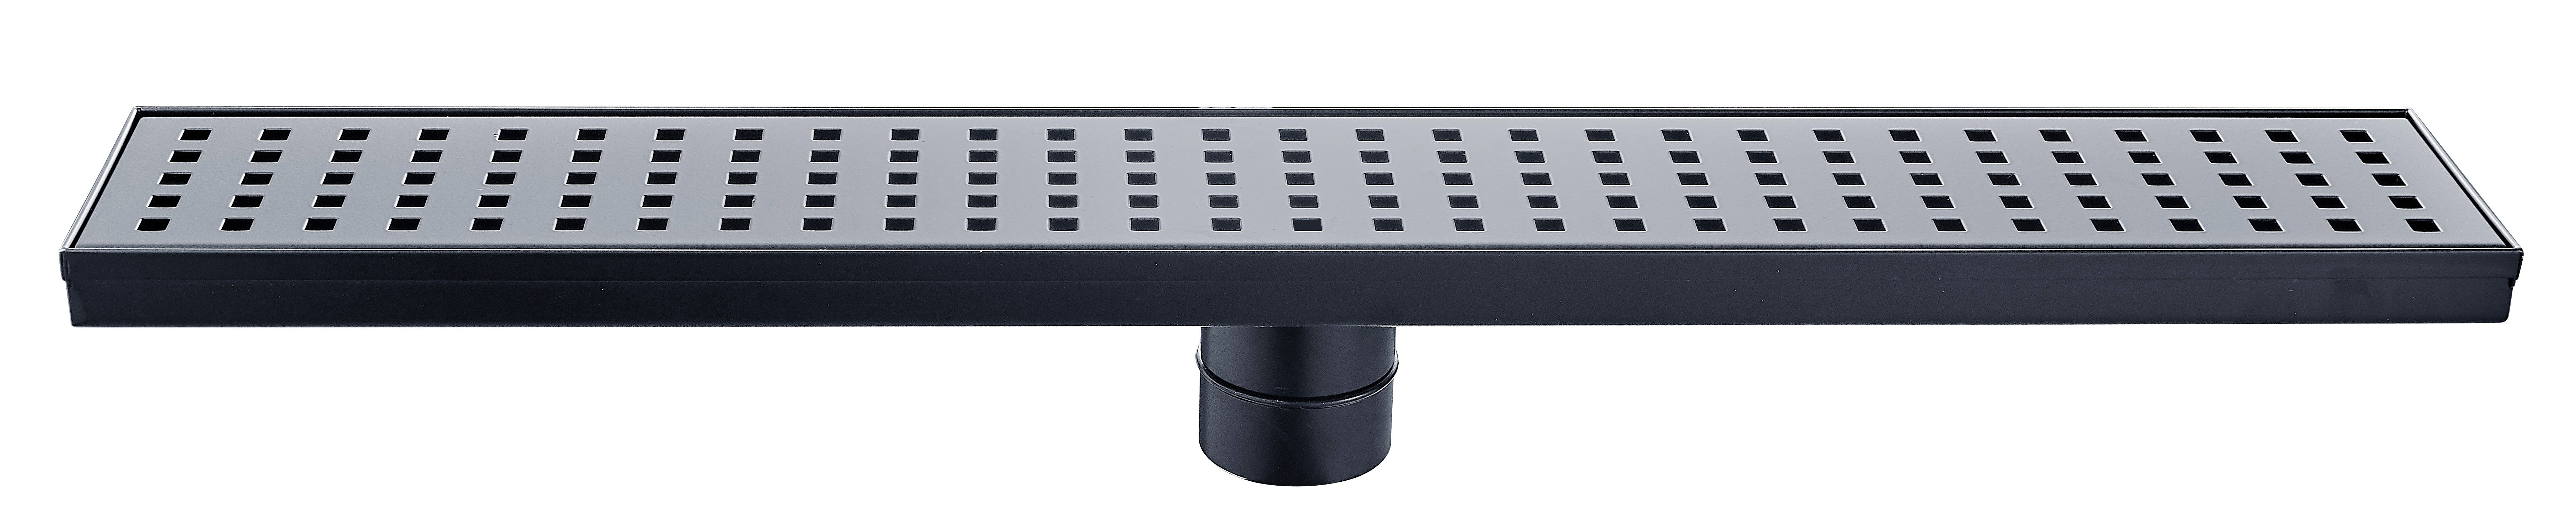 Aquamoon Black Insert 32x3.5" inch  Linear Shower Drain, 316 Stainless Steel Rectangle with Hair Strainer and Fittings